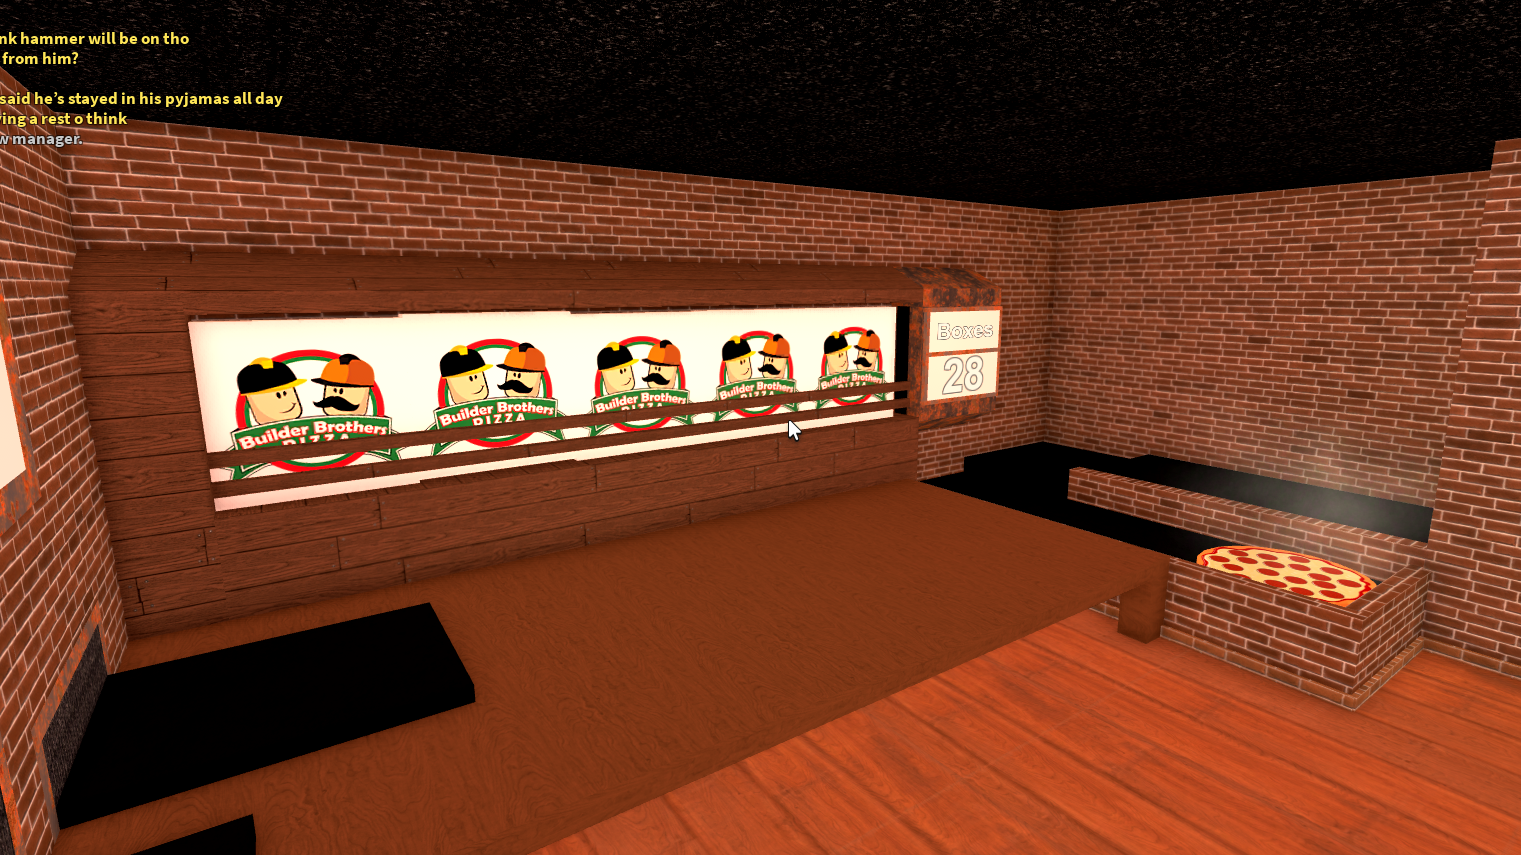 Pizza Boxing Room, Work at a Pizza Place Wiki